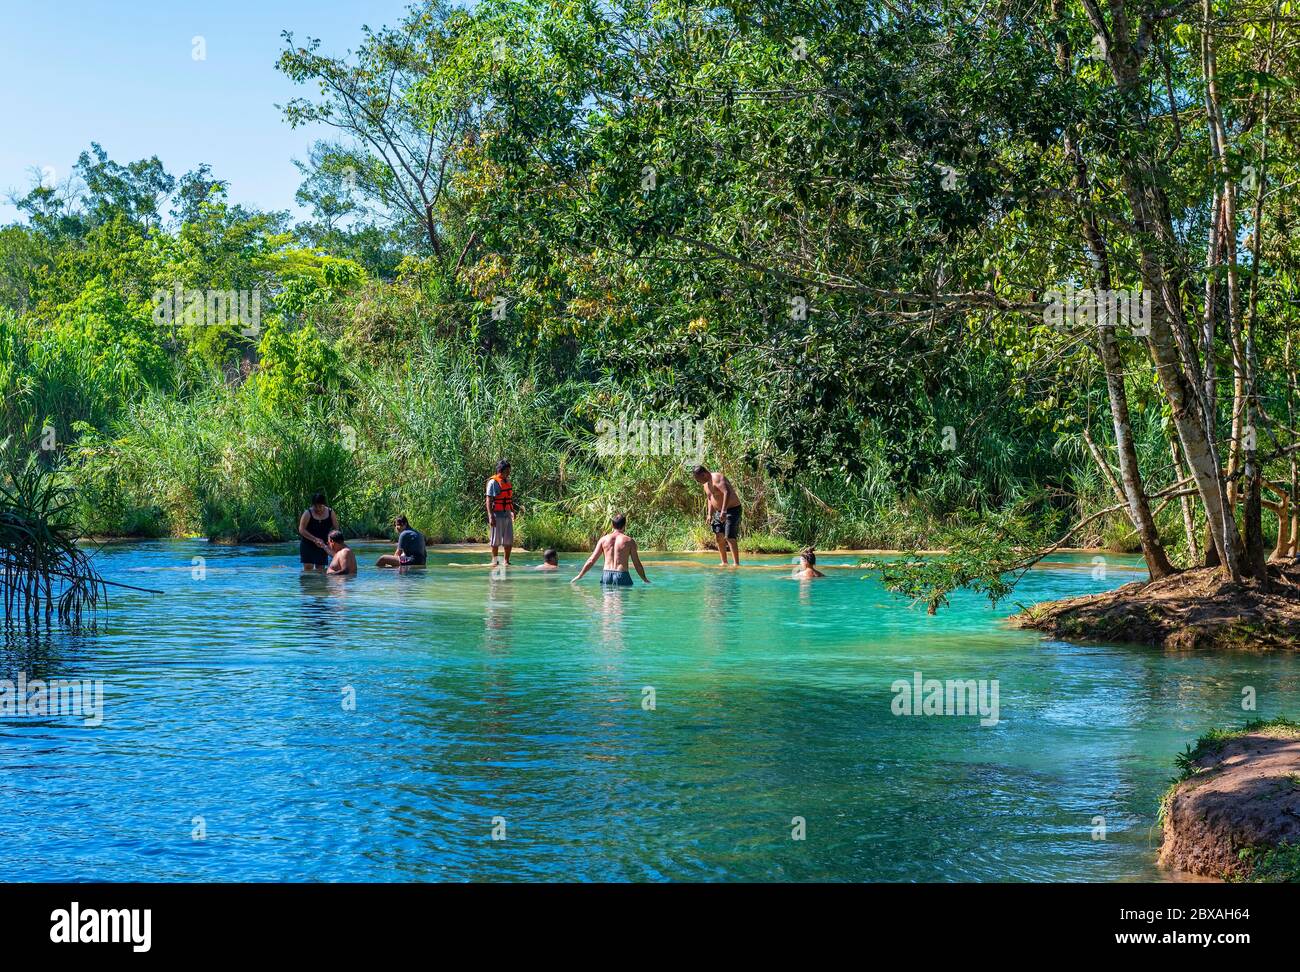 People swimming and relaxing in the turquoise water pools and cascades in the rainforest and jungle setting in the Mexican state of Chiapas, Mexico. Stock Photo